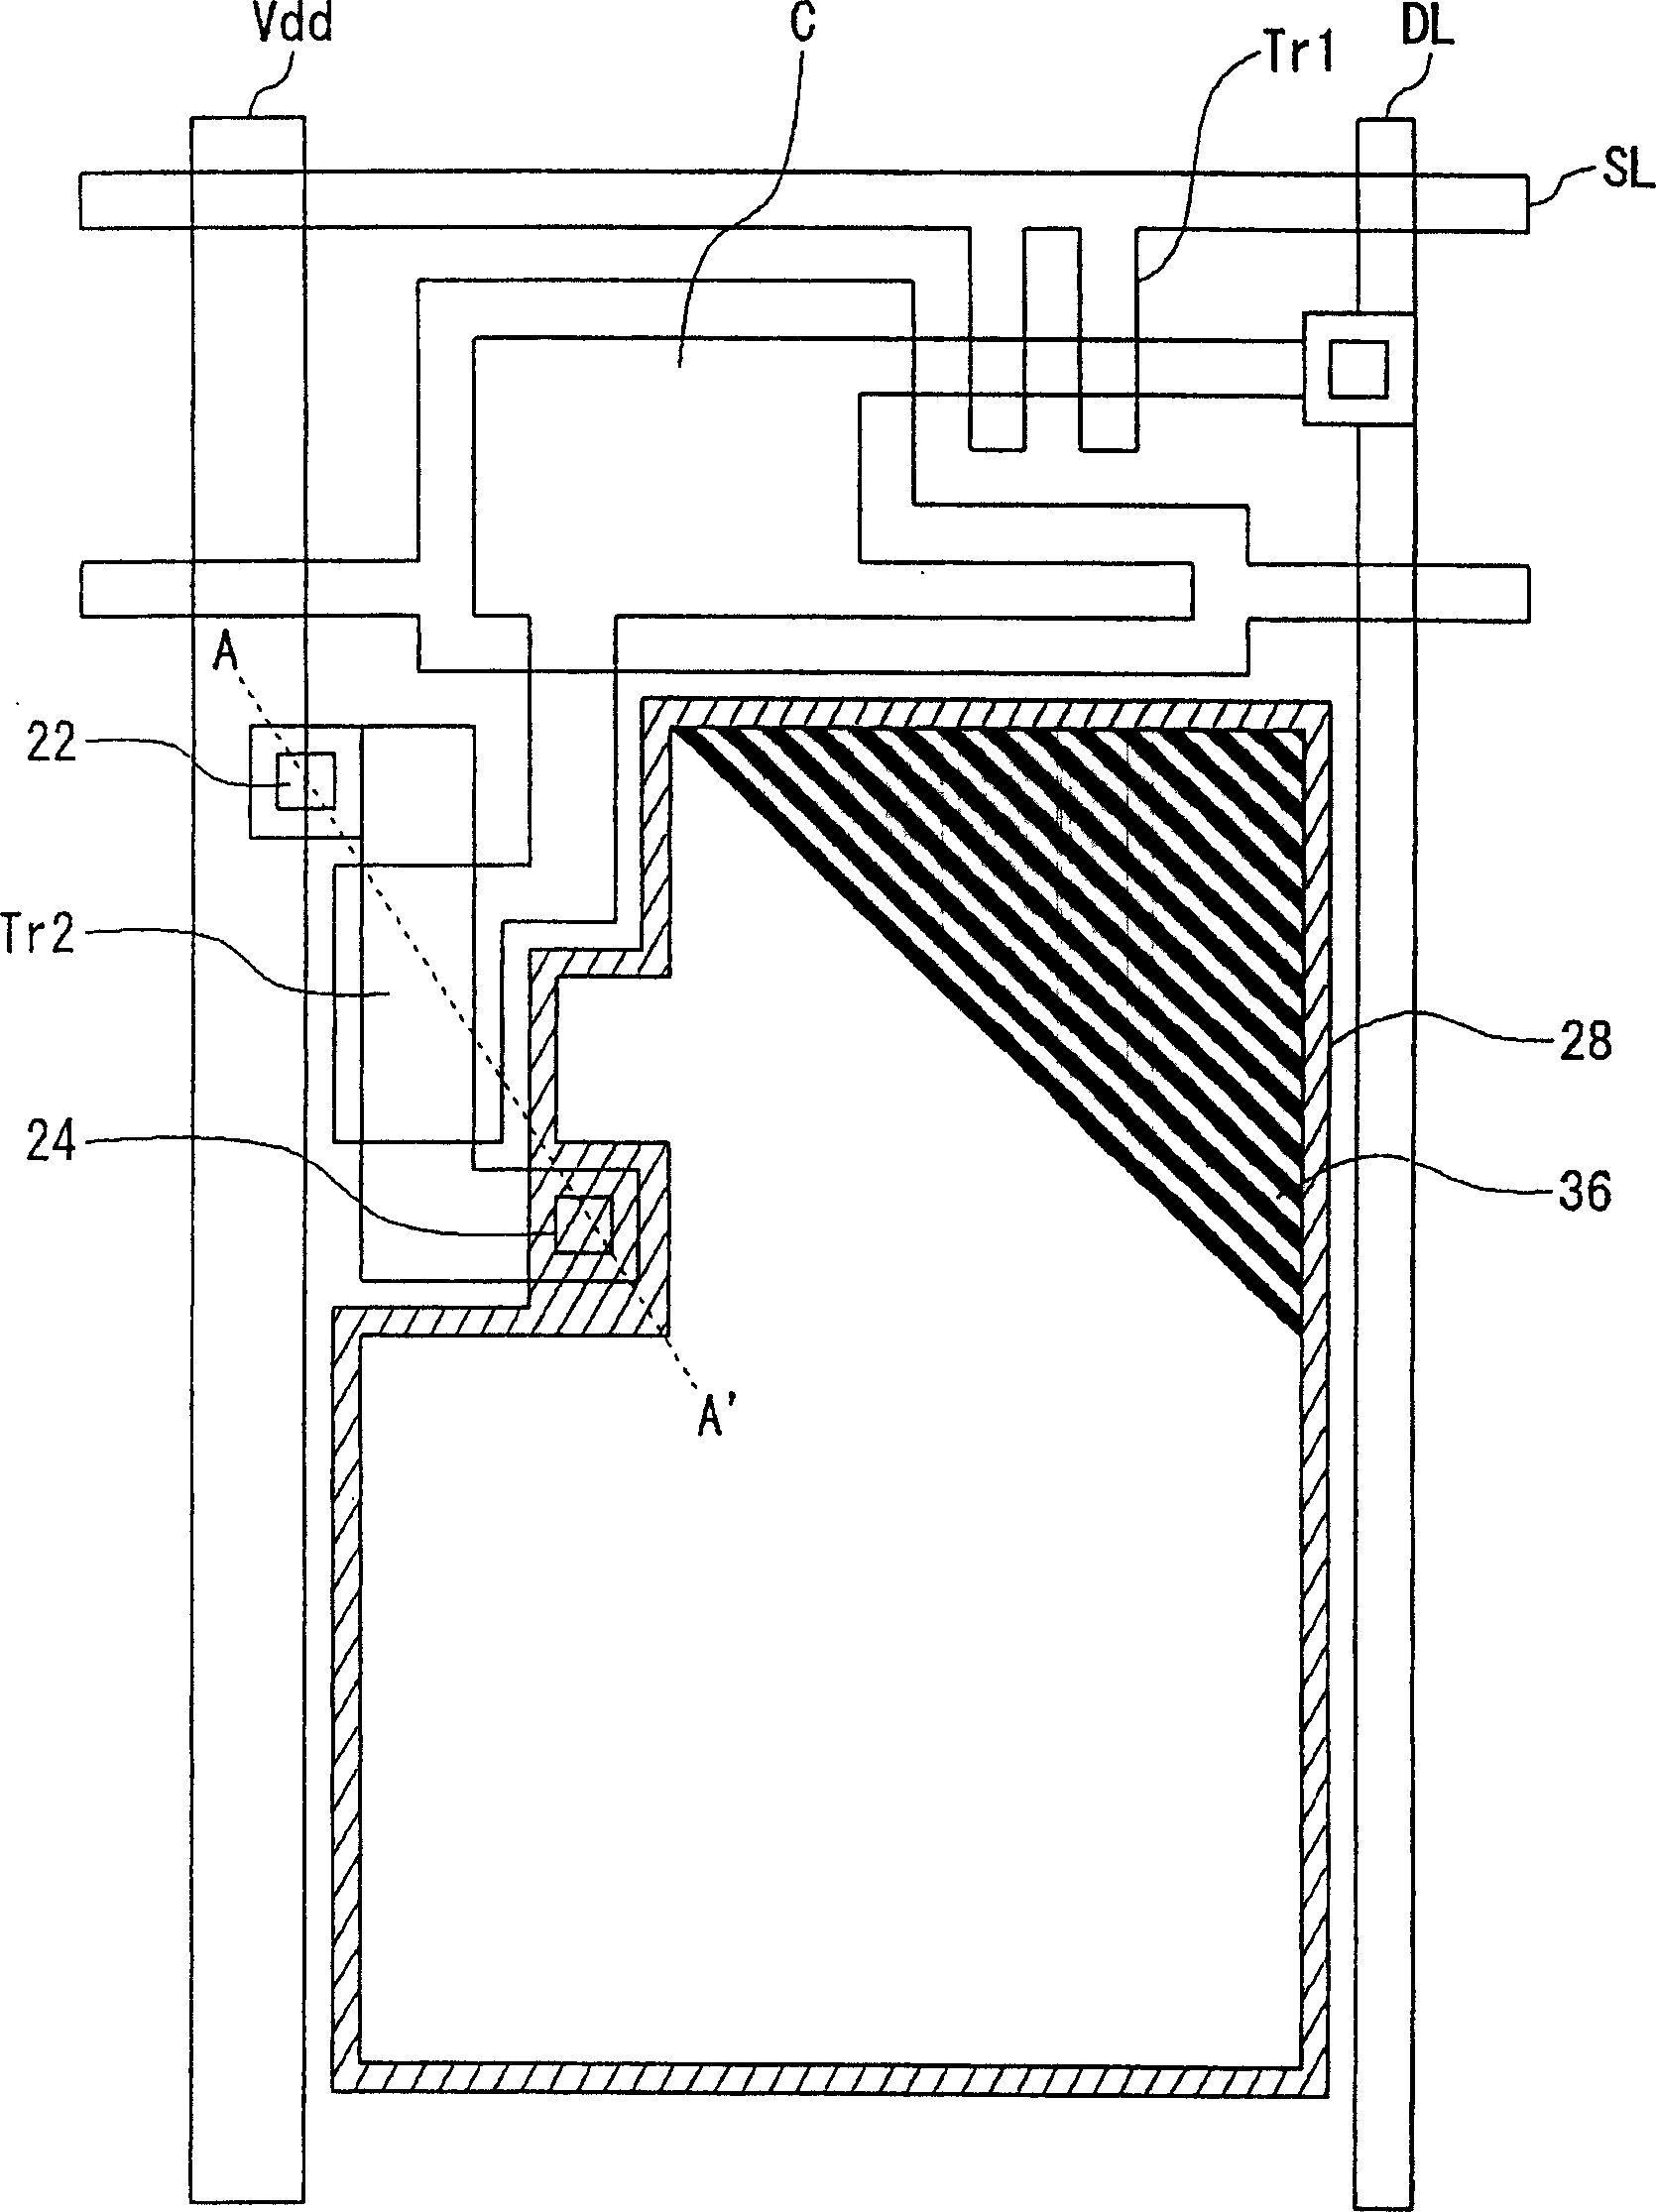 Light-emission device and its manufacturing method